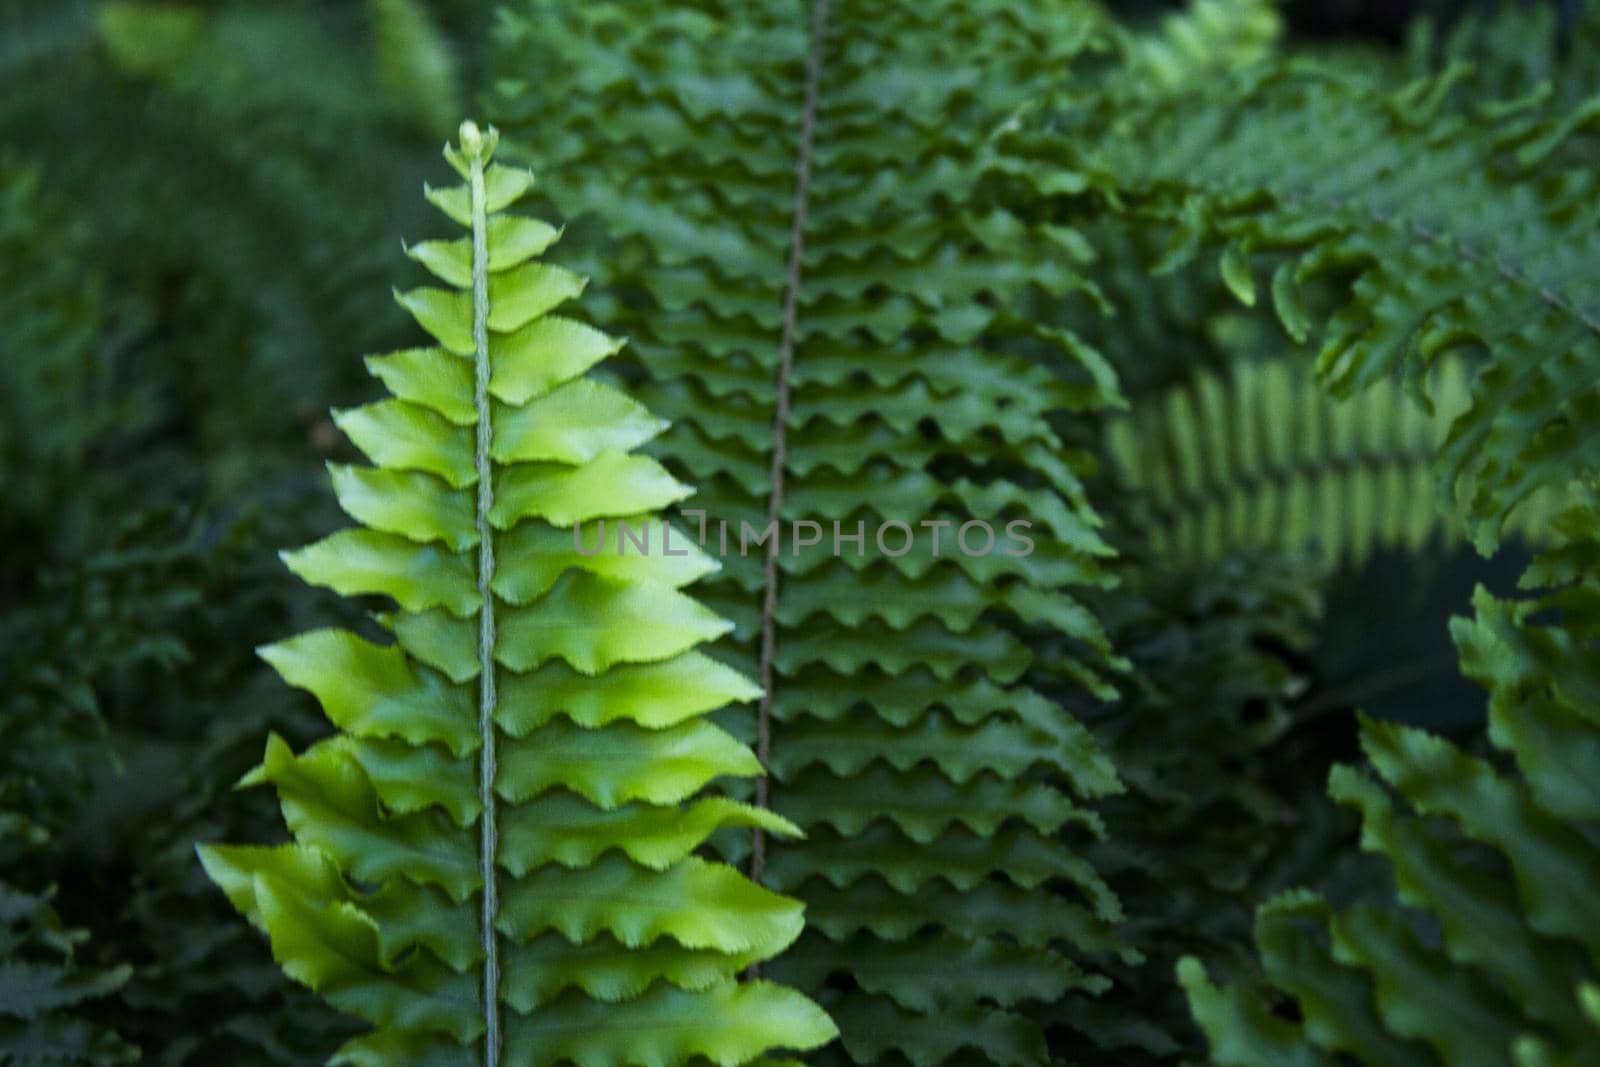 Dark green fern leaves in tropical environment. No people